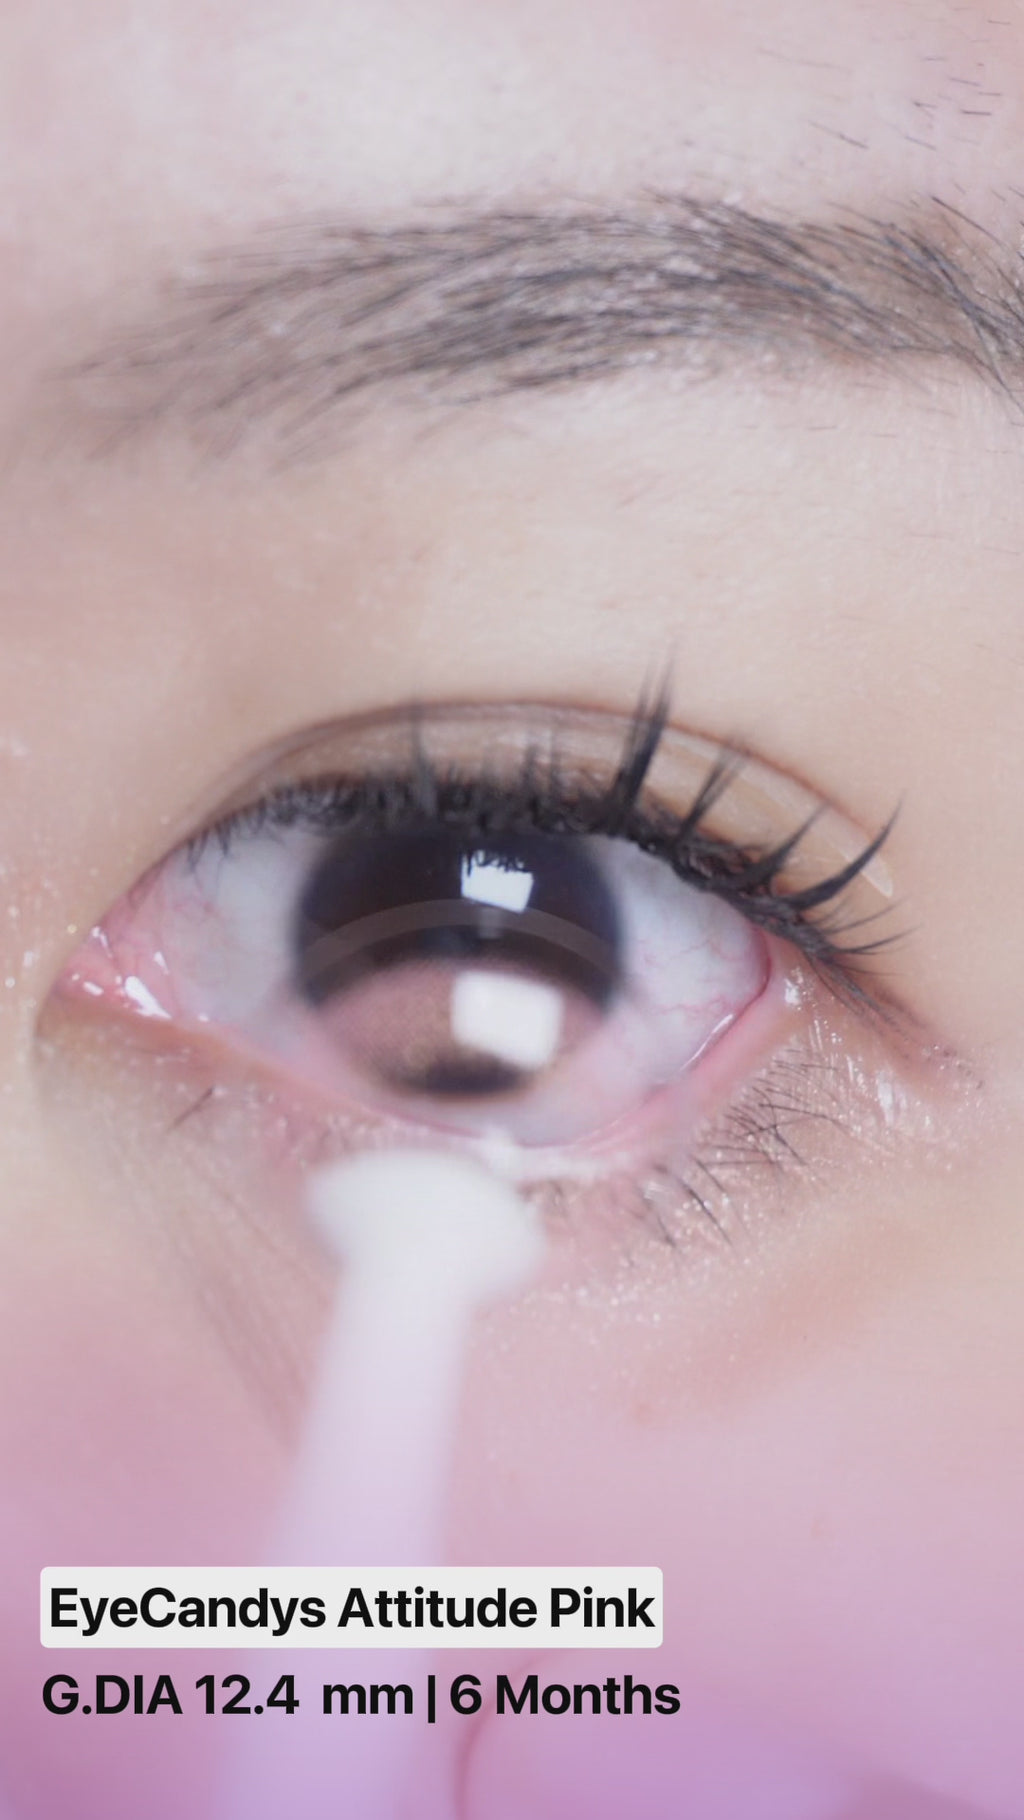 Applying the Attitude Pink colour contact lens on a naturally dark eye using a lens applicator tool, showing the opacity of the soft pink contact lens from various angles.